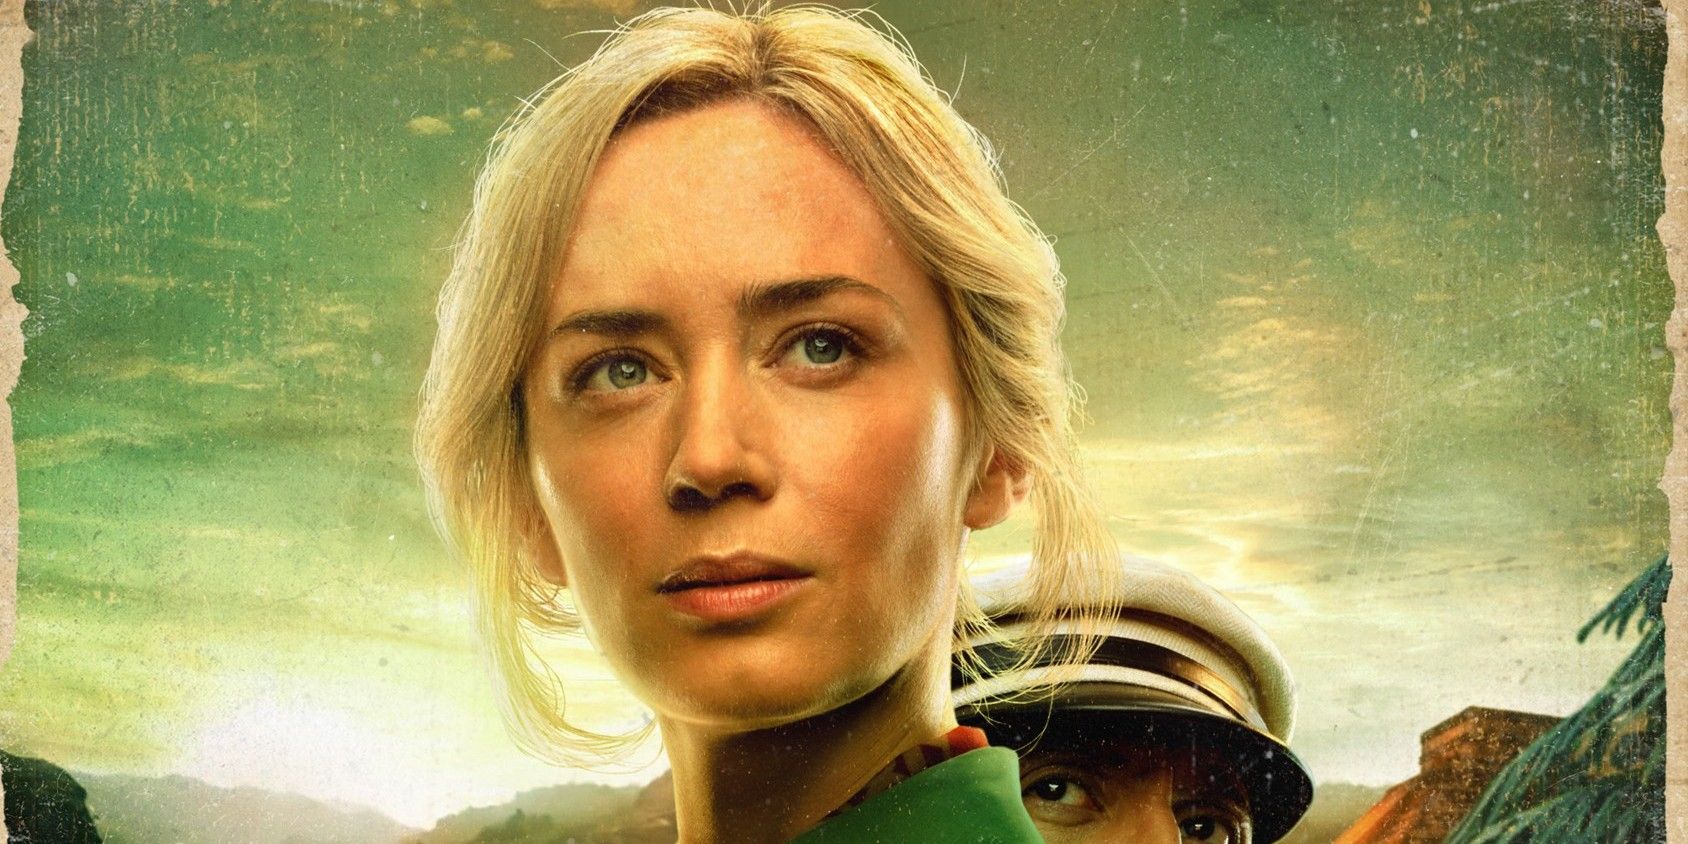 Emily Blunt Compares Her Jungle Cruise Character To Indiana Jones Geeky Craze